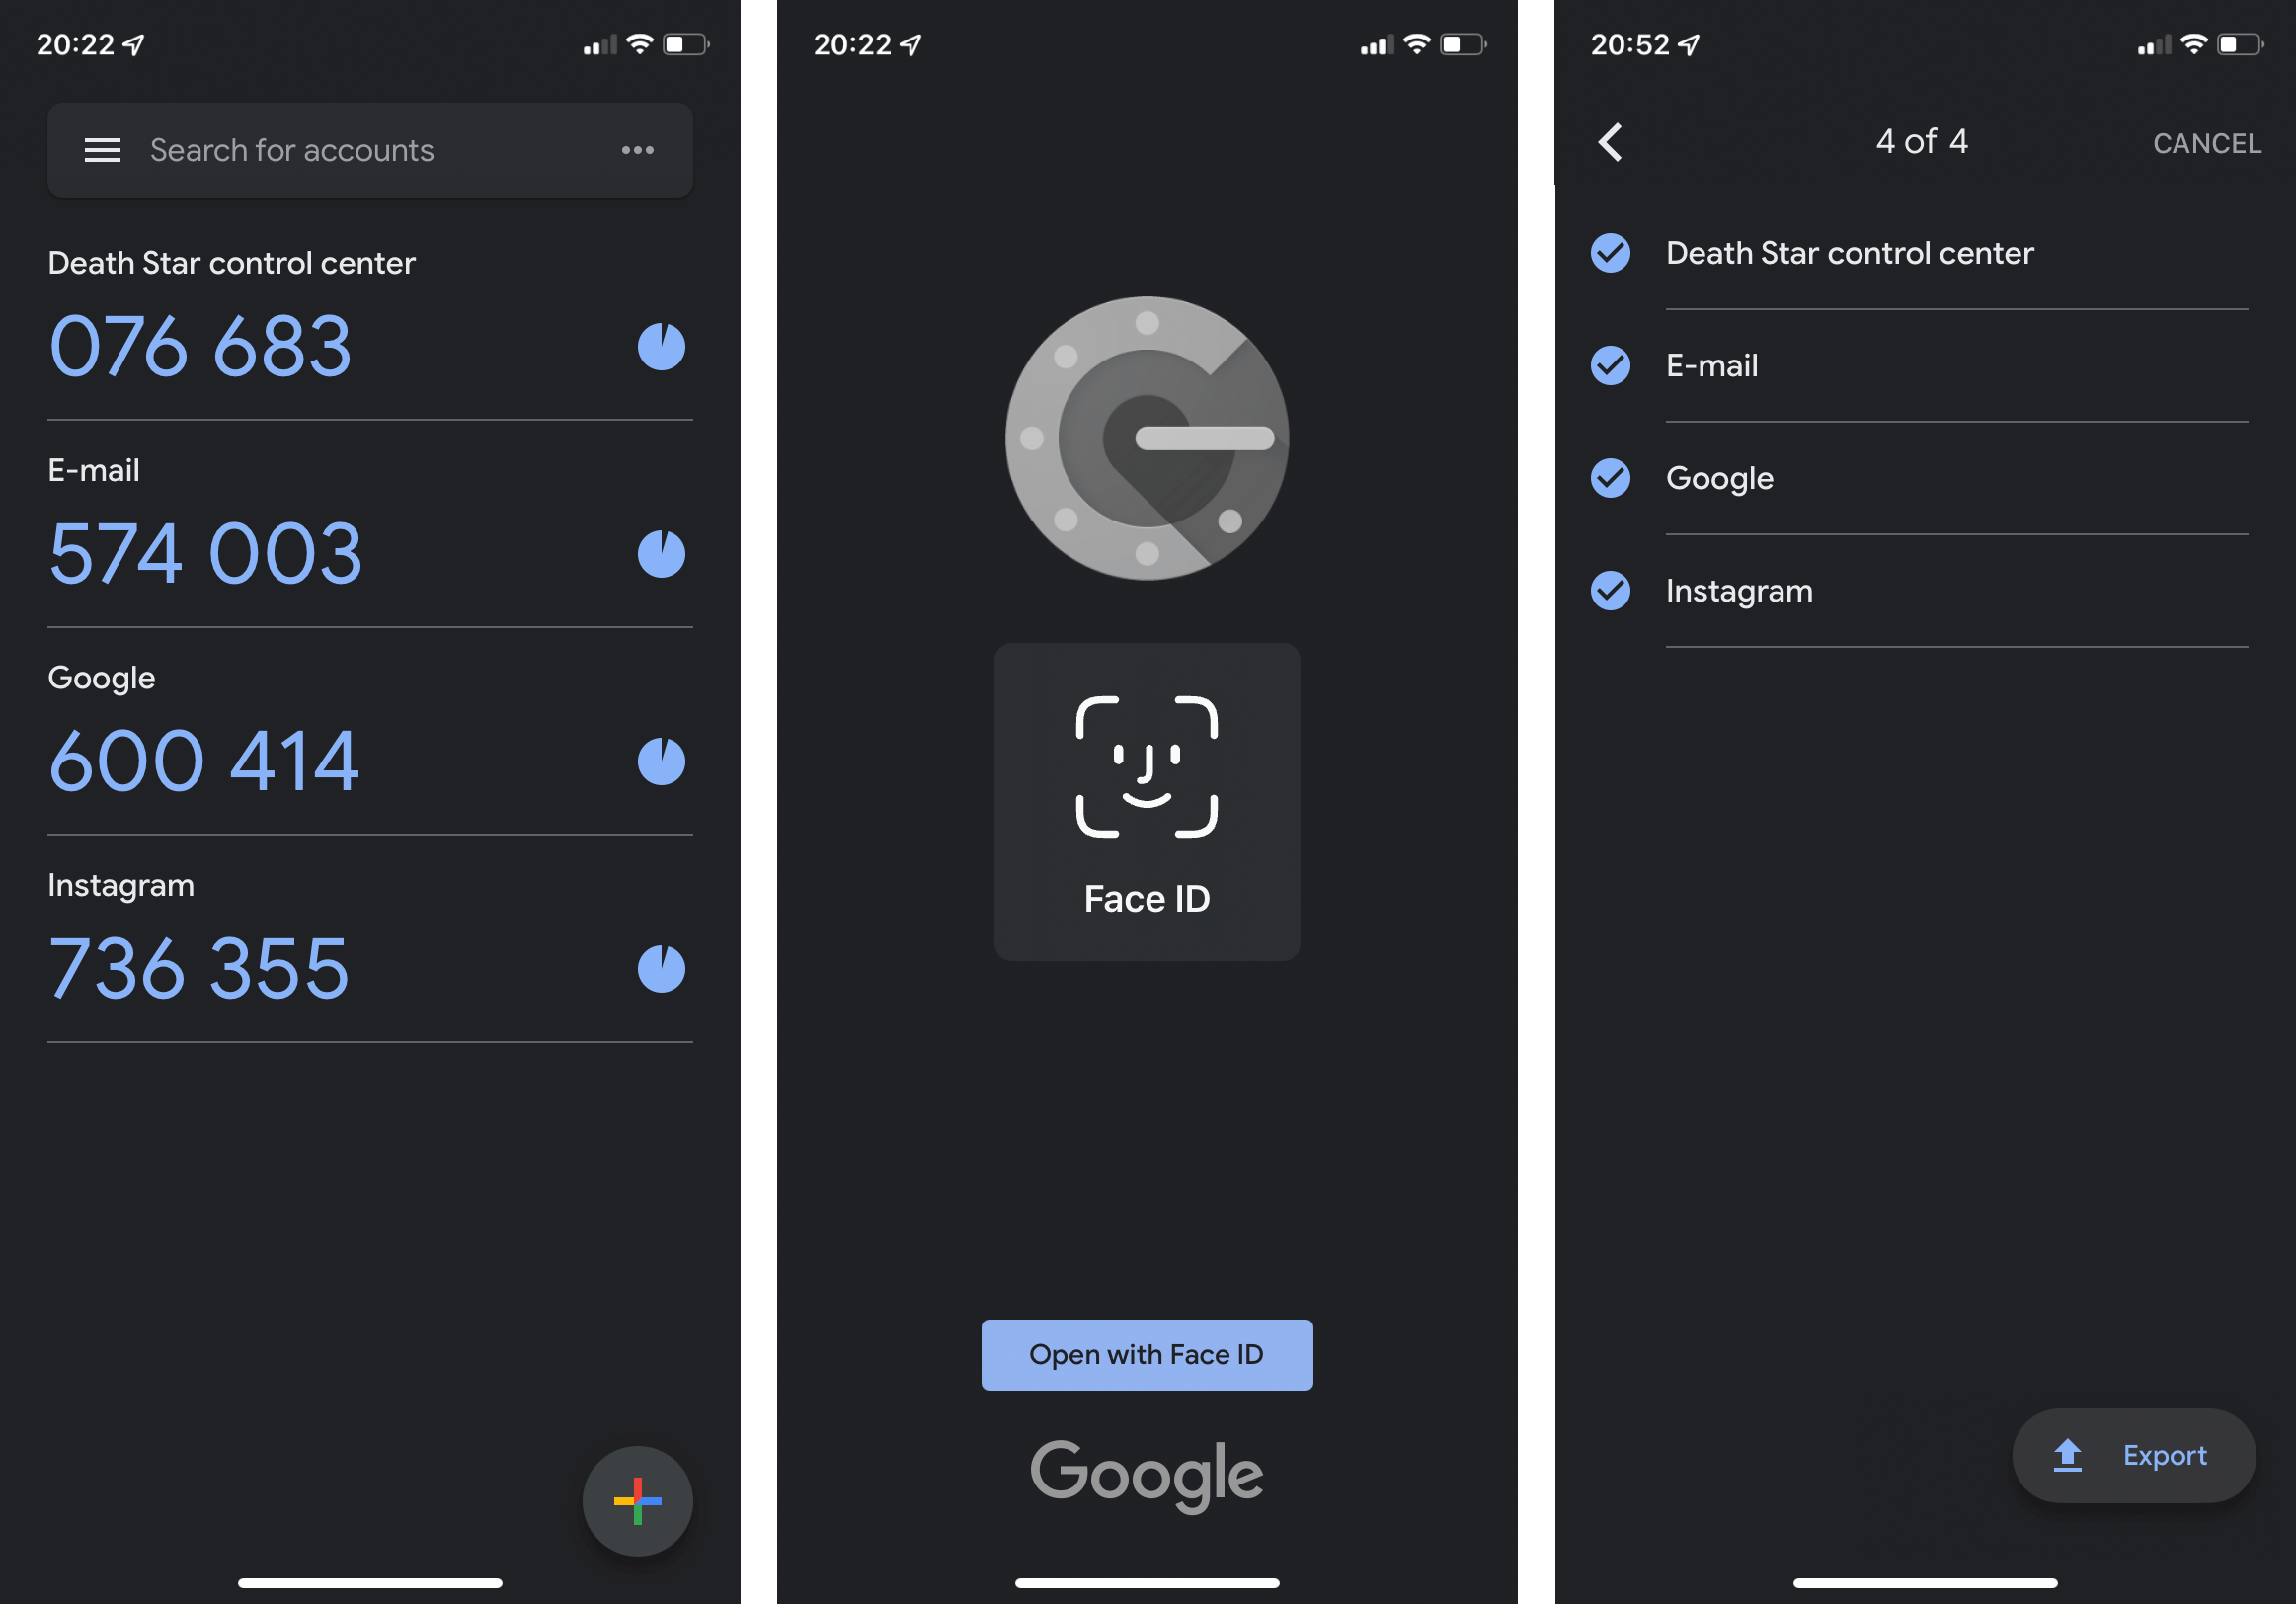 Google Authenticator: the most well-known authenticator app